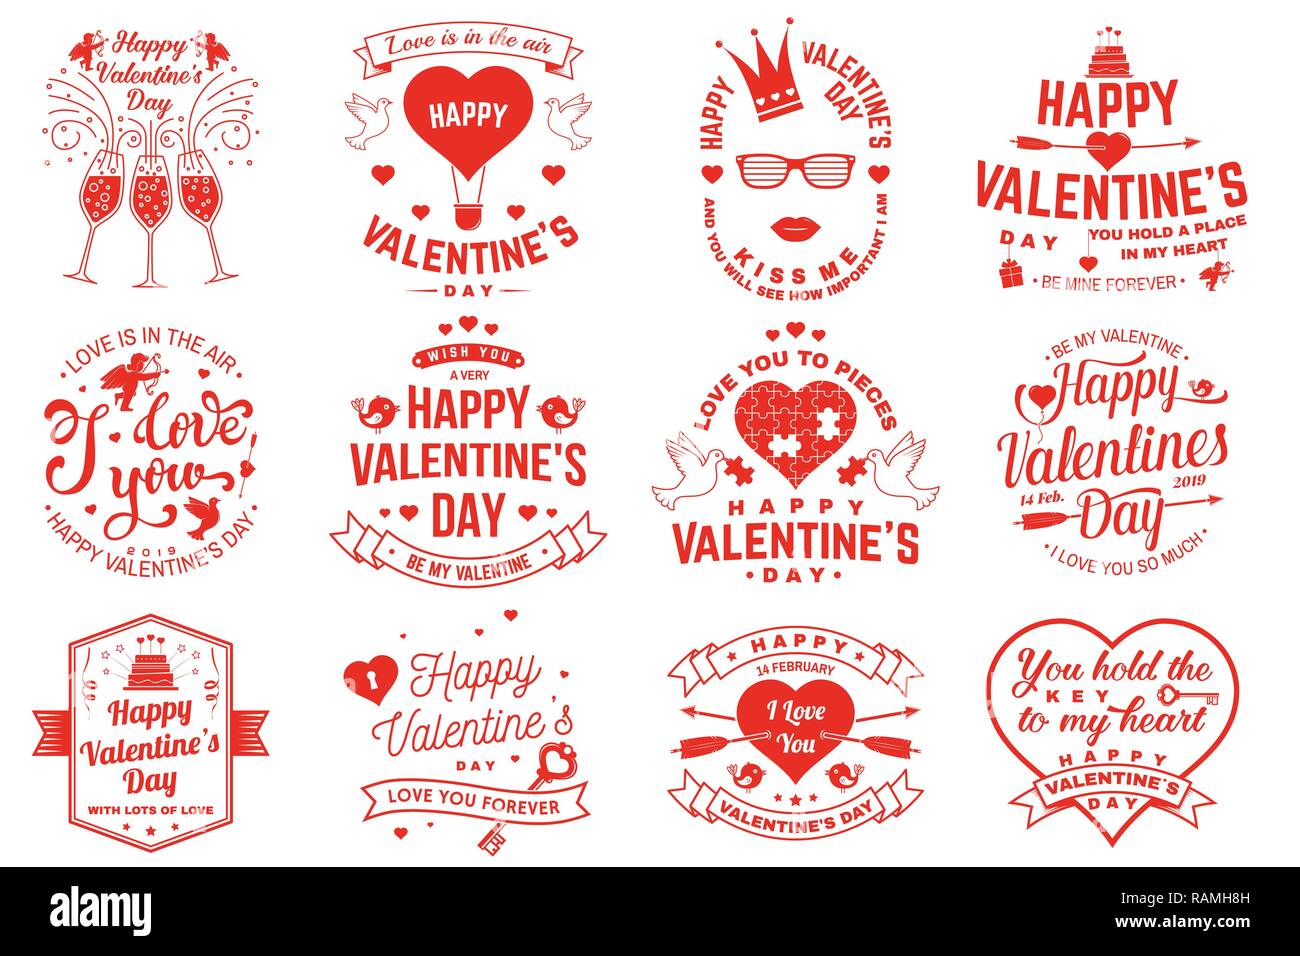 Set of Happy Valentines Day sign. Stamp, sticker, card with key, bird, amur, arrow, heart. Vector. Vintage typography design for invitations, Valentines Day romantic celebration emblem in retro style. Stock Vector